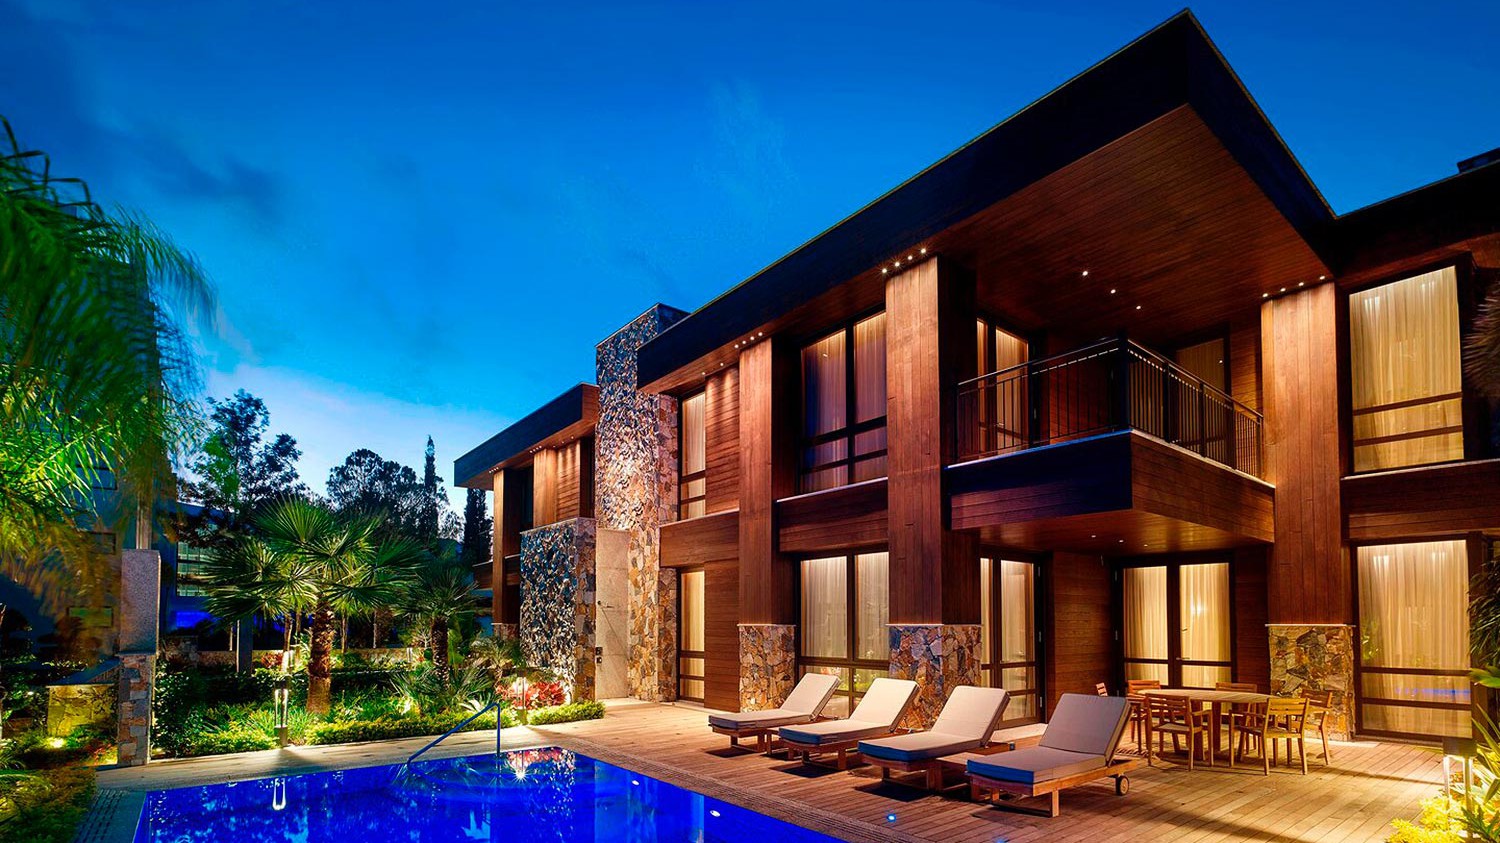 Control Harmonizes with the Luxury at a World Class Resort